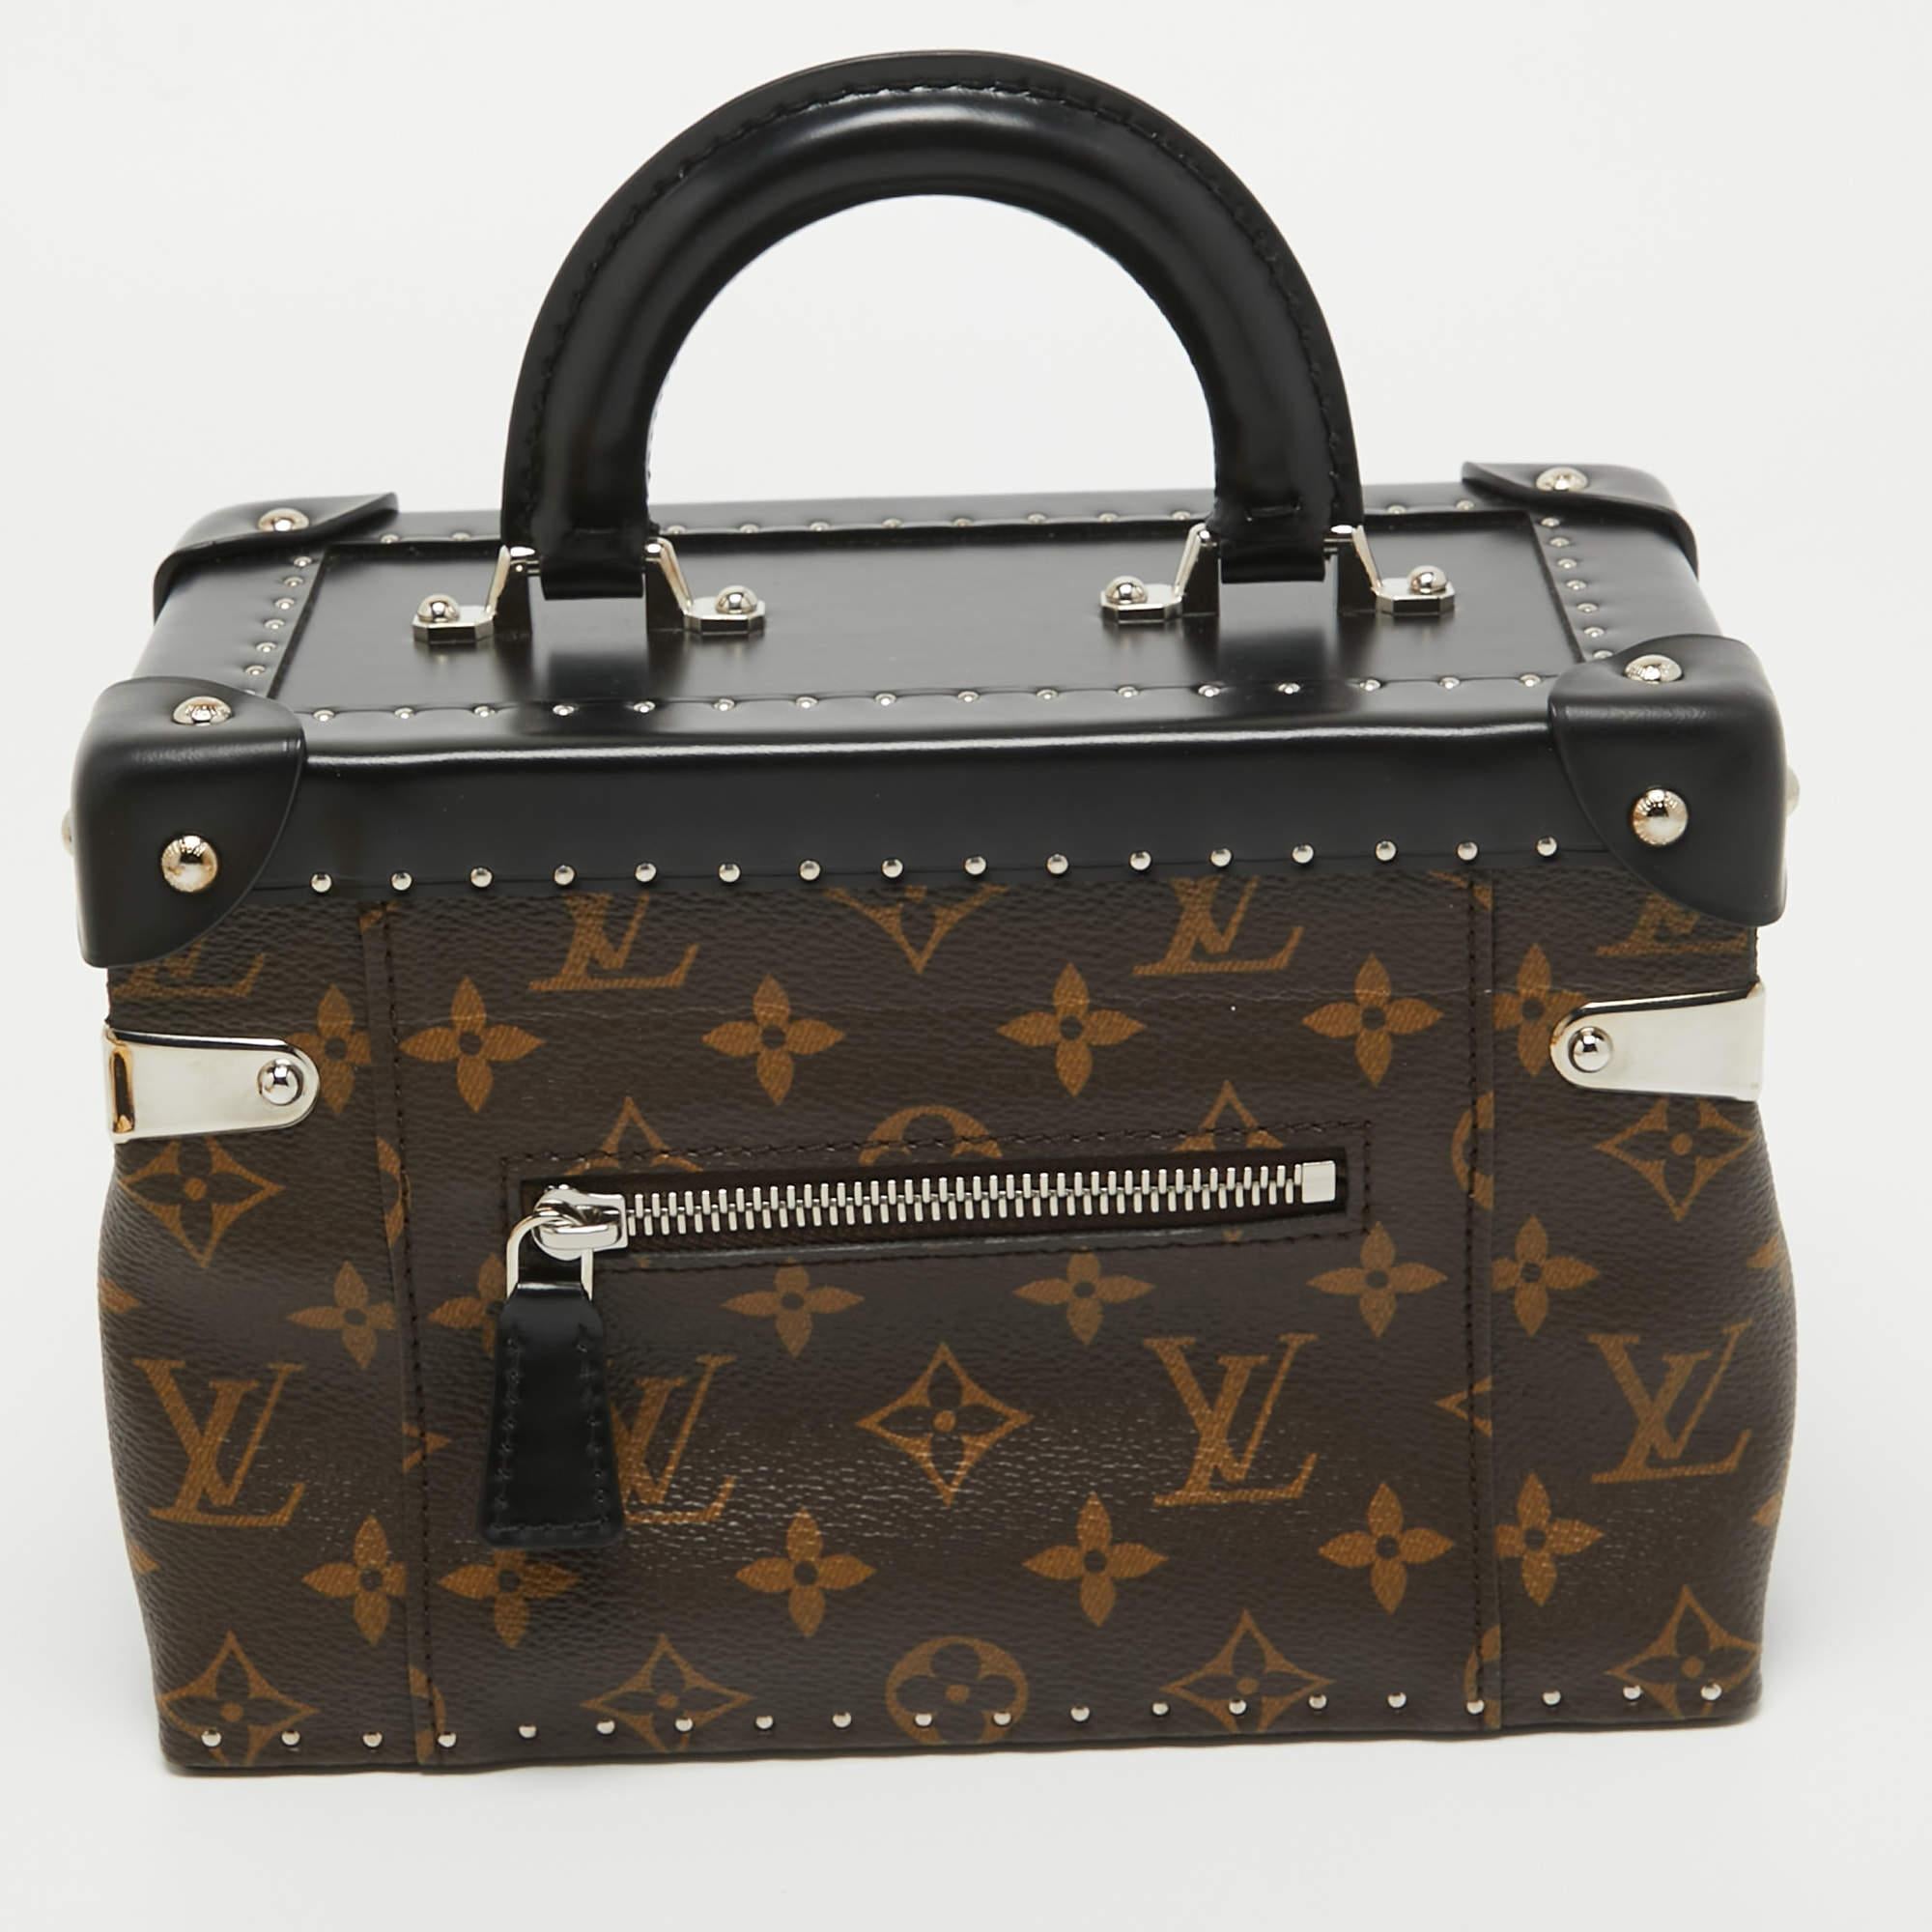 Indulge in timeless luxury with this Louis Vuitton bag. Meticulously crafted, this iconic piece combines heritage, elegance, and craftsmanship, elevating your style to a level of unmatched sophistication.

Includes: Original Dustbag, Original Box,